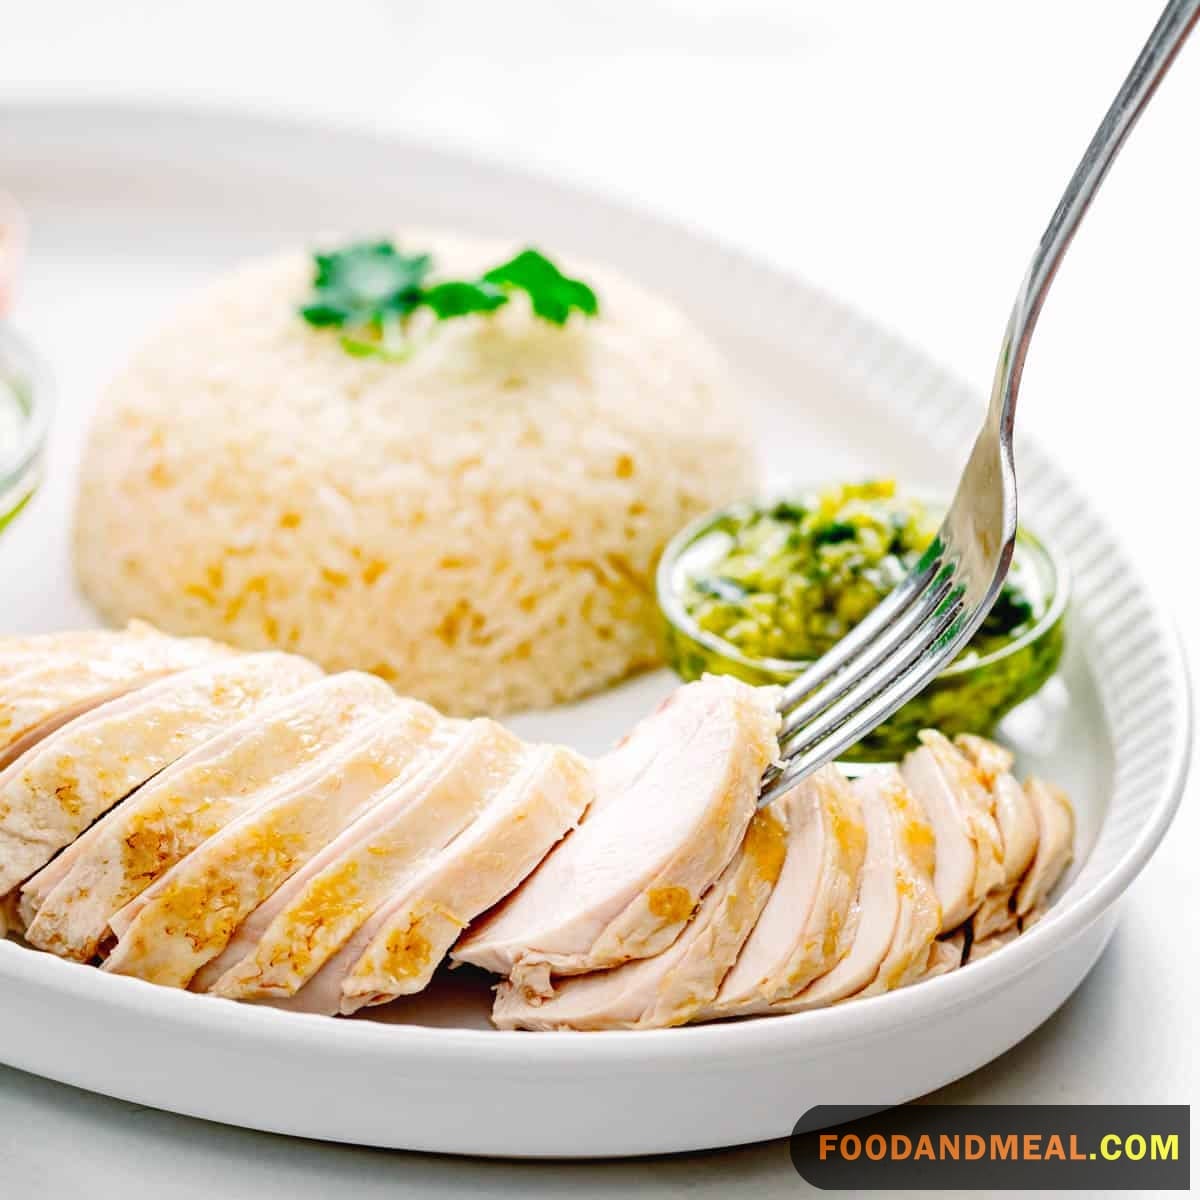 Serving Hainanese Chicken Rice In Stuffed Bell Peppers Makes For An Exciting Presentation.